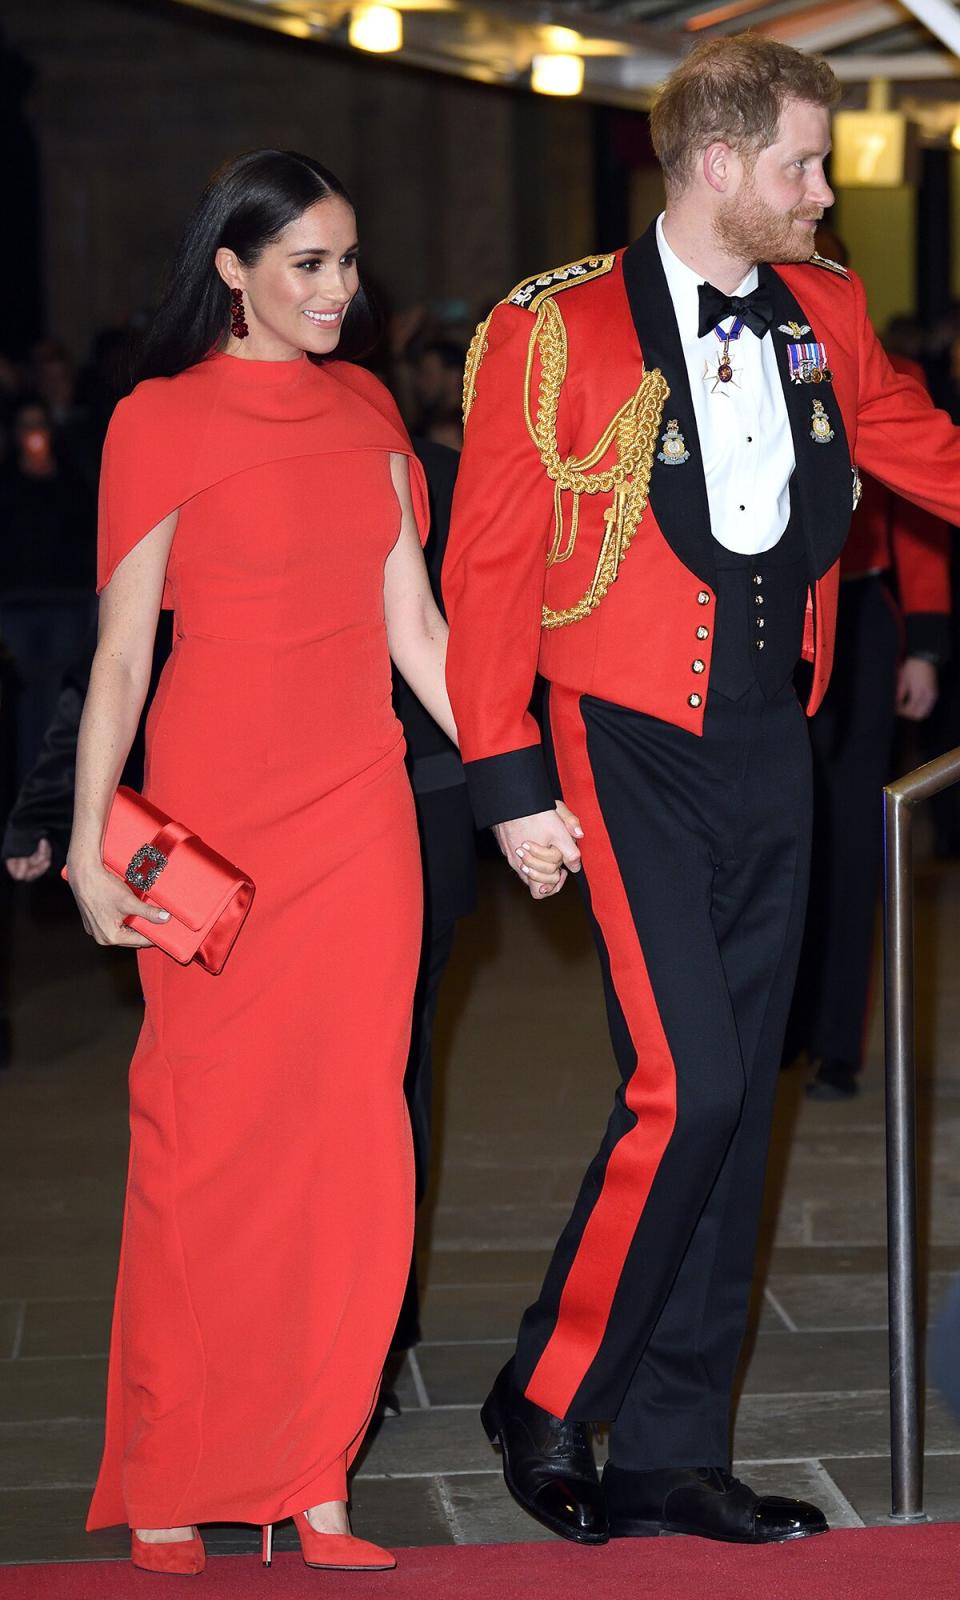 Prince Harry, Duke of Sussex and Meghan, Duchess of Sussex attend the Mountbatten Festival of Music at Royal Albert Hall on March 07, 2020 in London, England